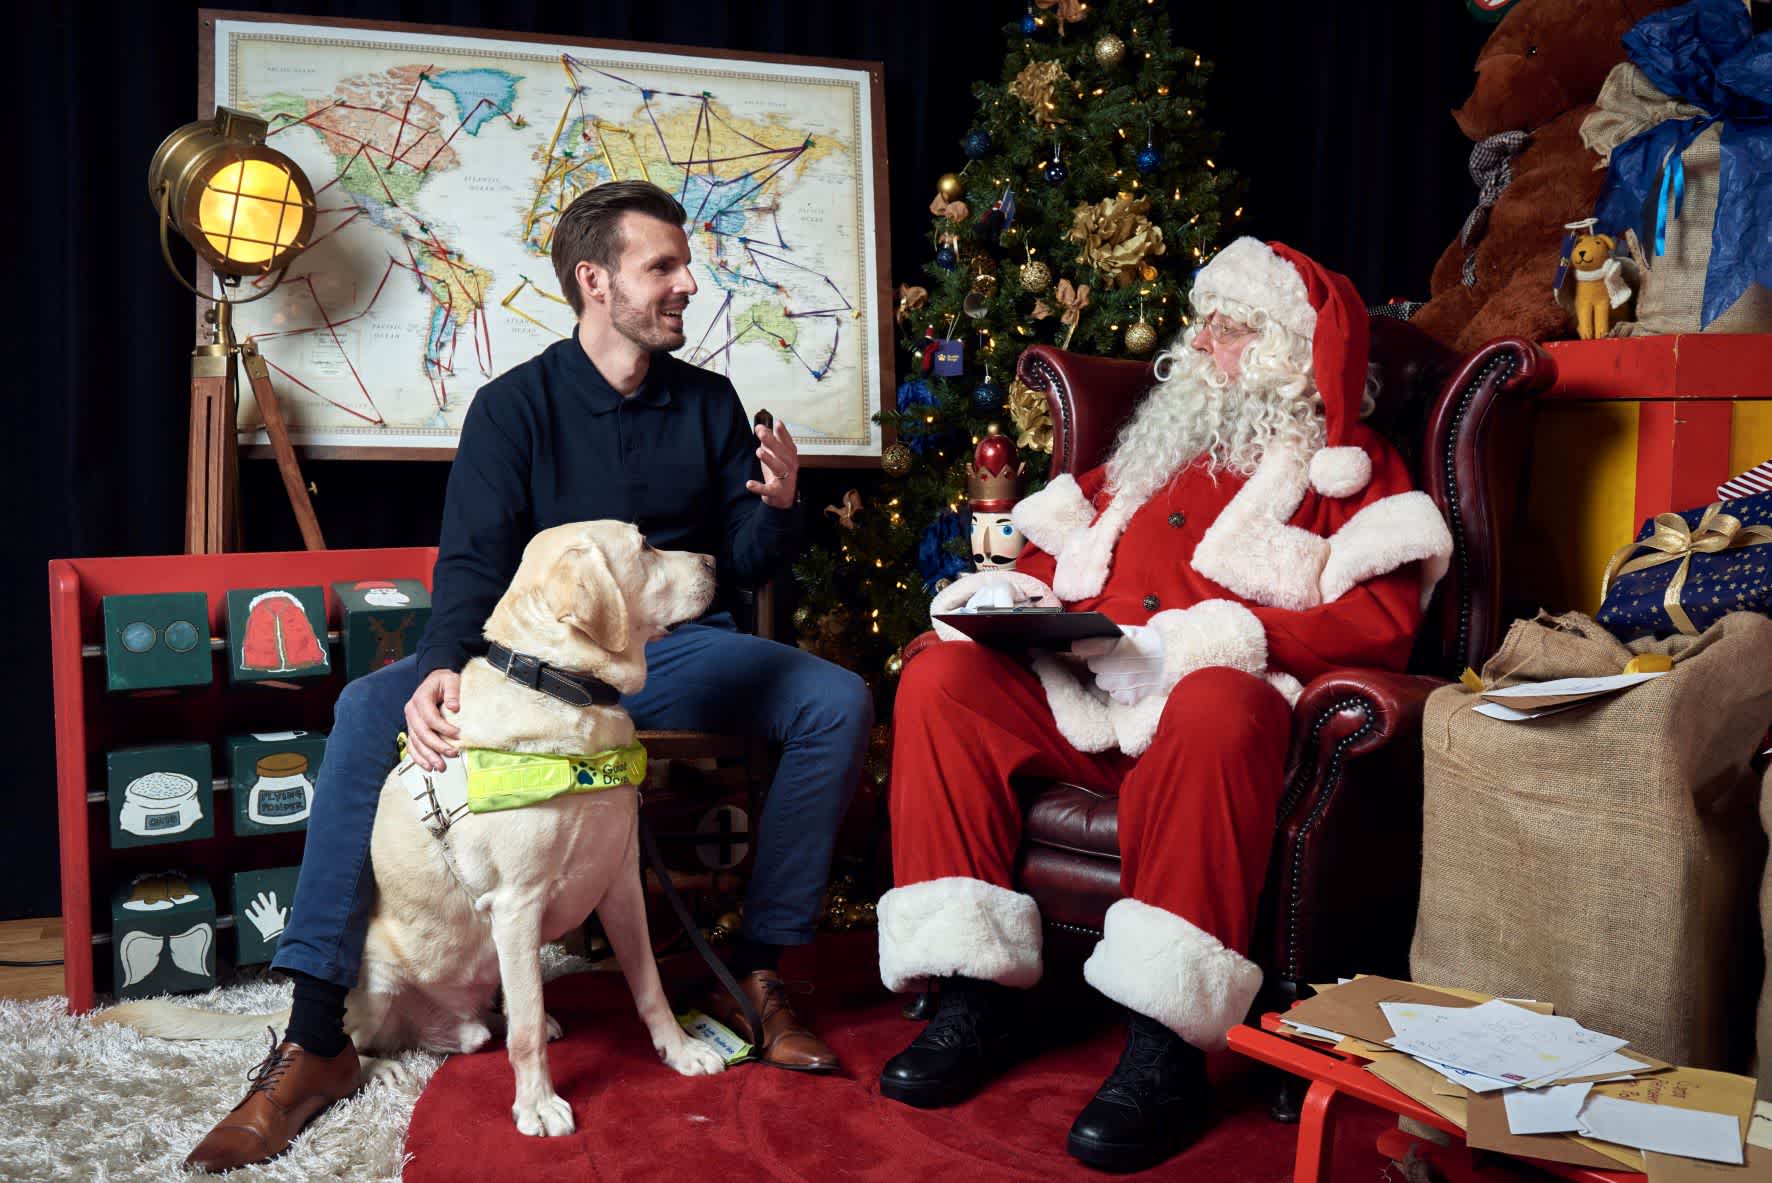 Alex Pepper, Head of Accessibility at Guide Dogs, sits with guide dog River and Santa in a Christmas grotto 